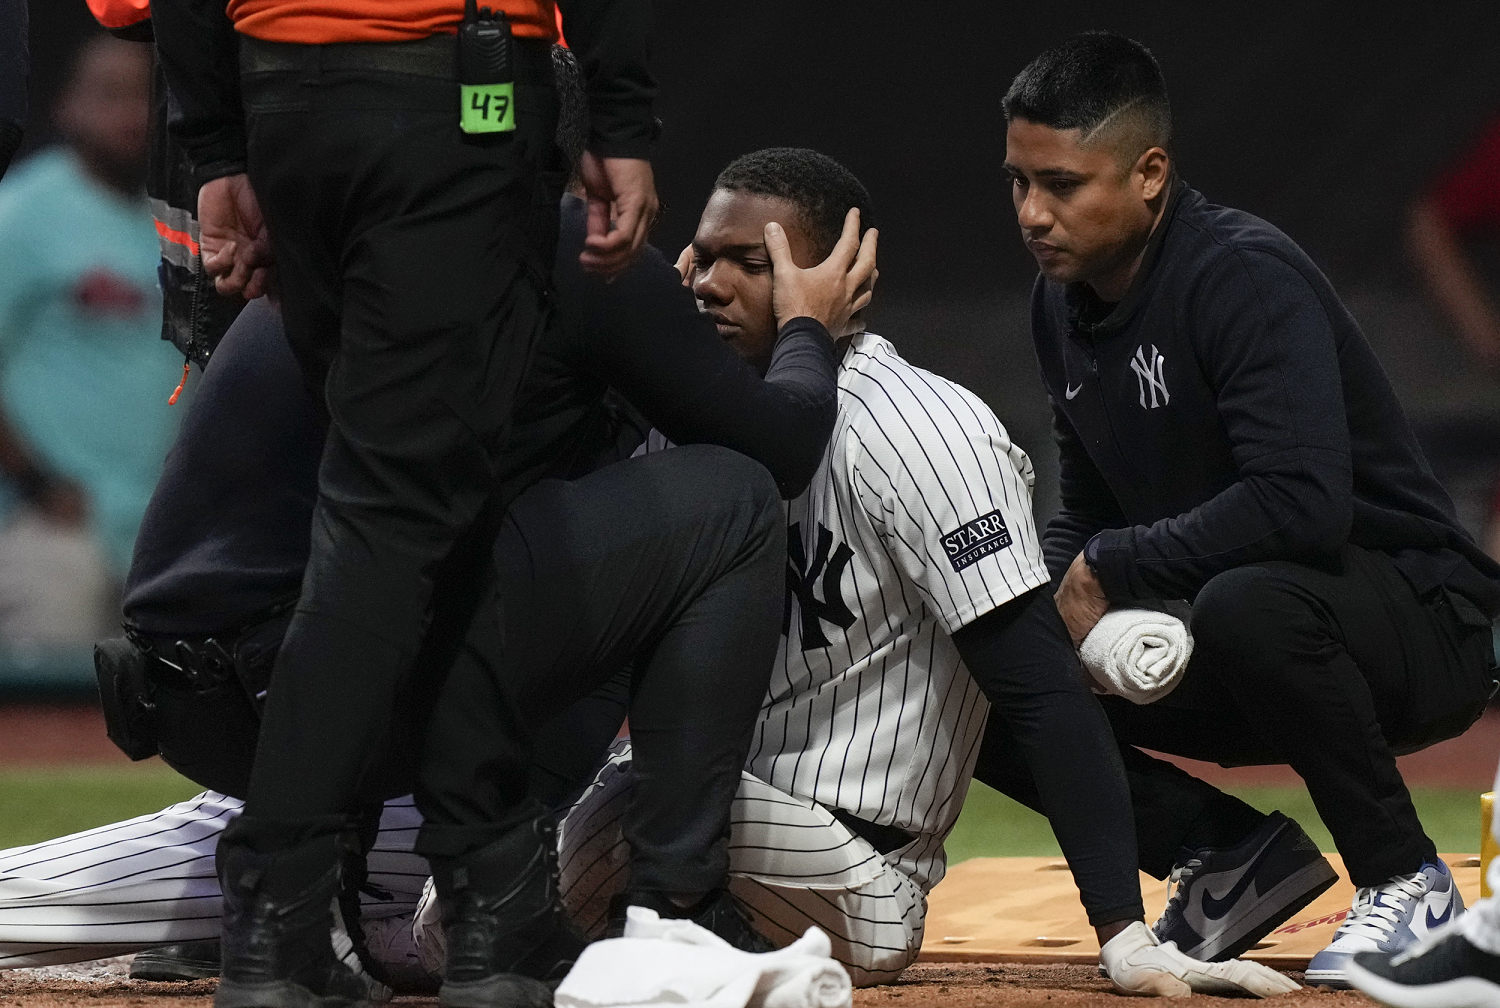 New York Yankee Oscar Gonzalez fractures right orbital after fouling ball into his own face